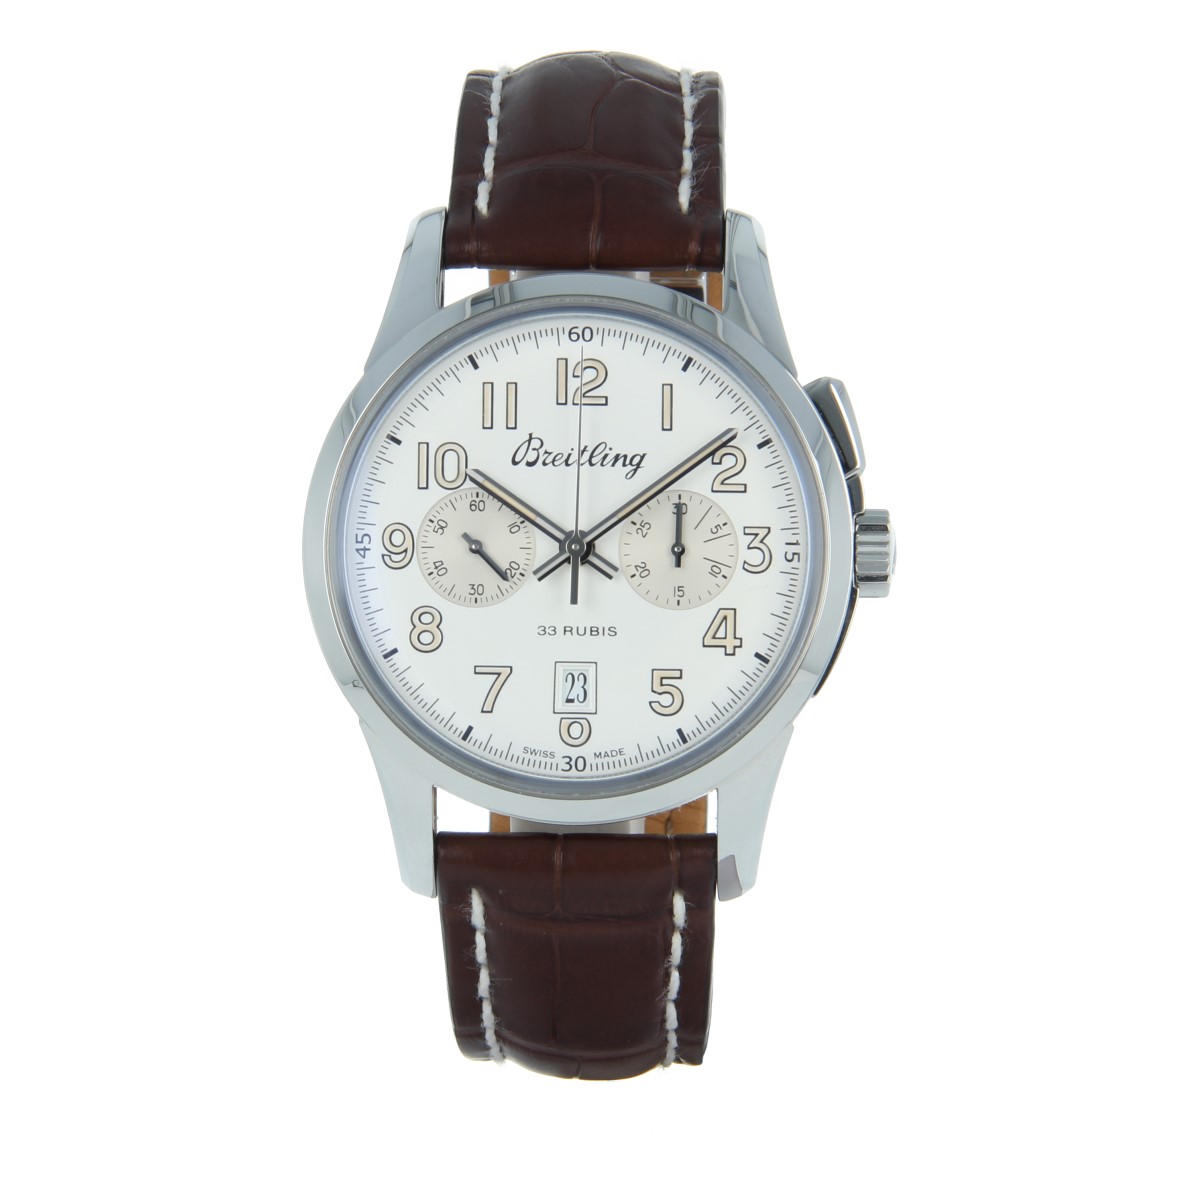 Breitling Transocean Chronograph 1915 Limited Edition  *New* | Buy pre-owned Breitling watches